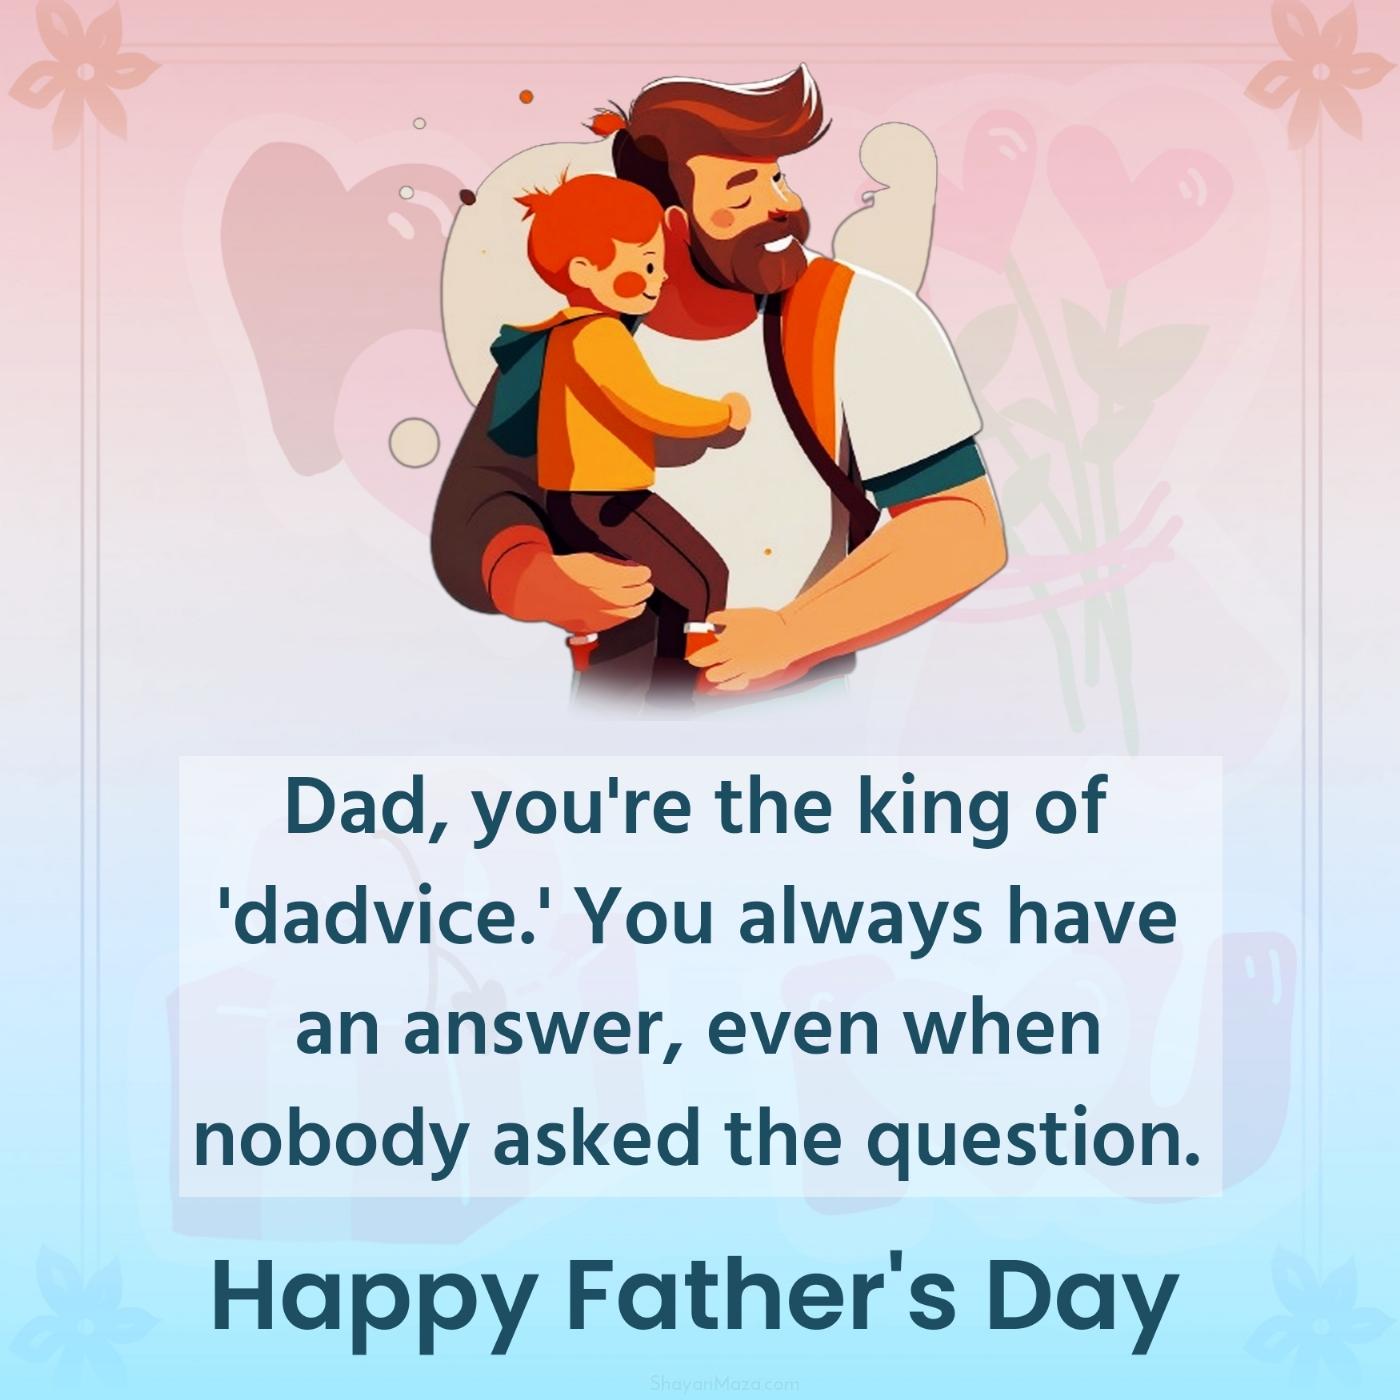 Dad you're the king of 'dadvice' You always have an answer